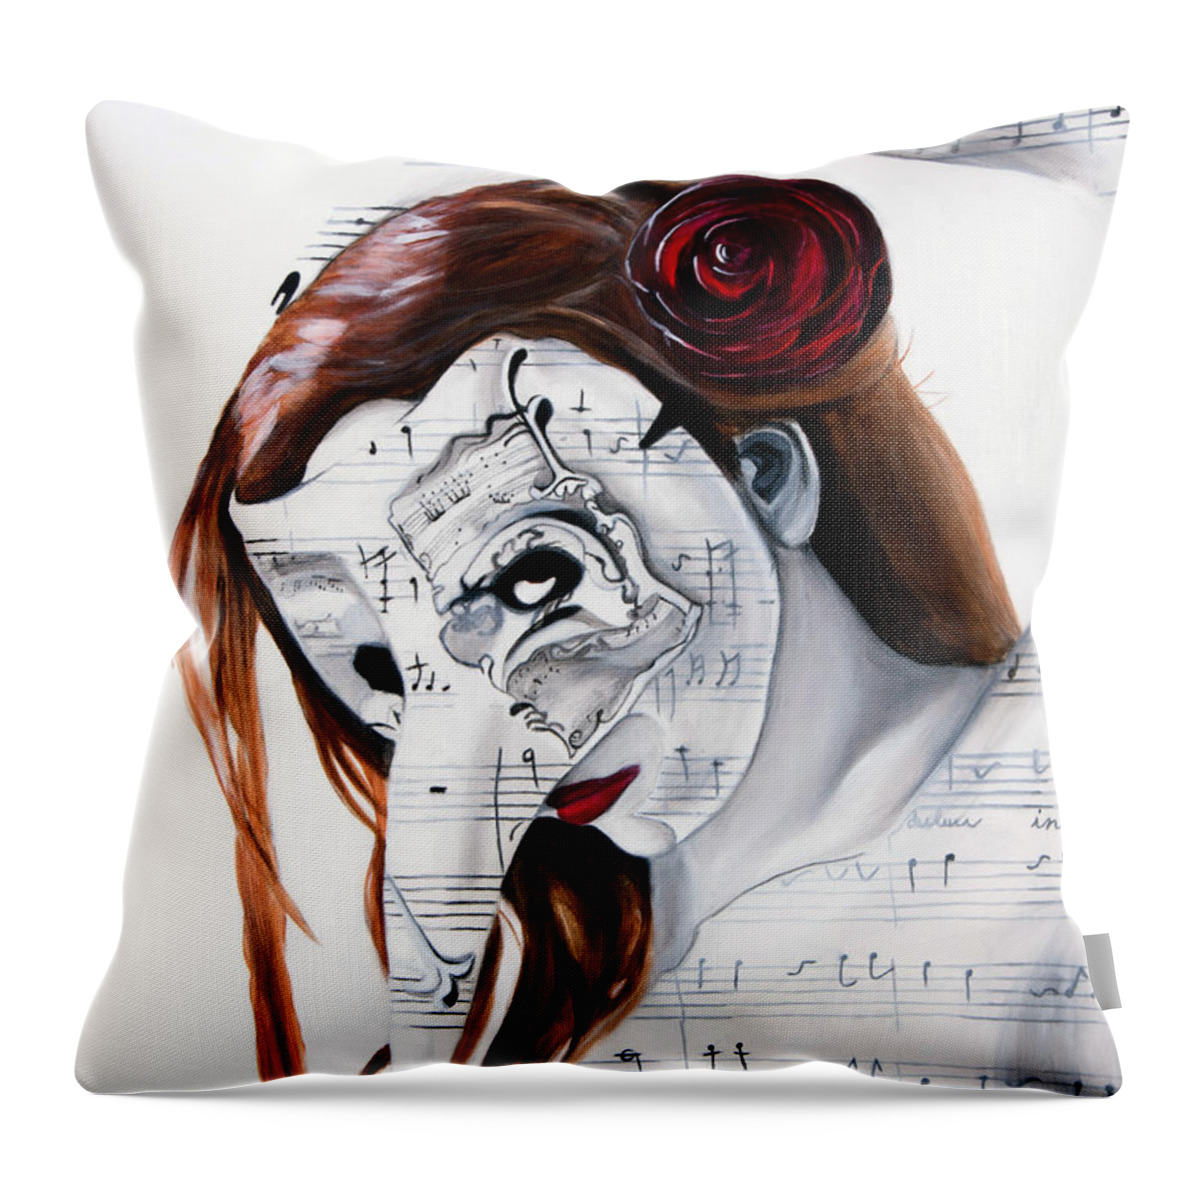 Denise Throw Pillow featuring the painting Requiem by Denise Deiloh